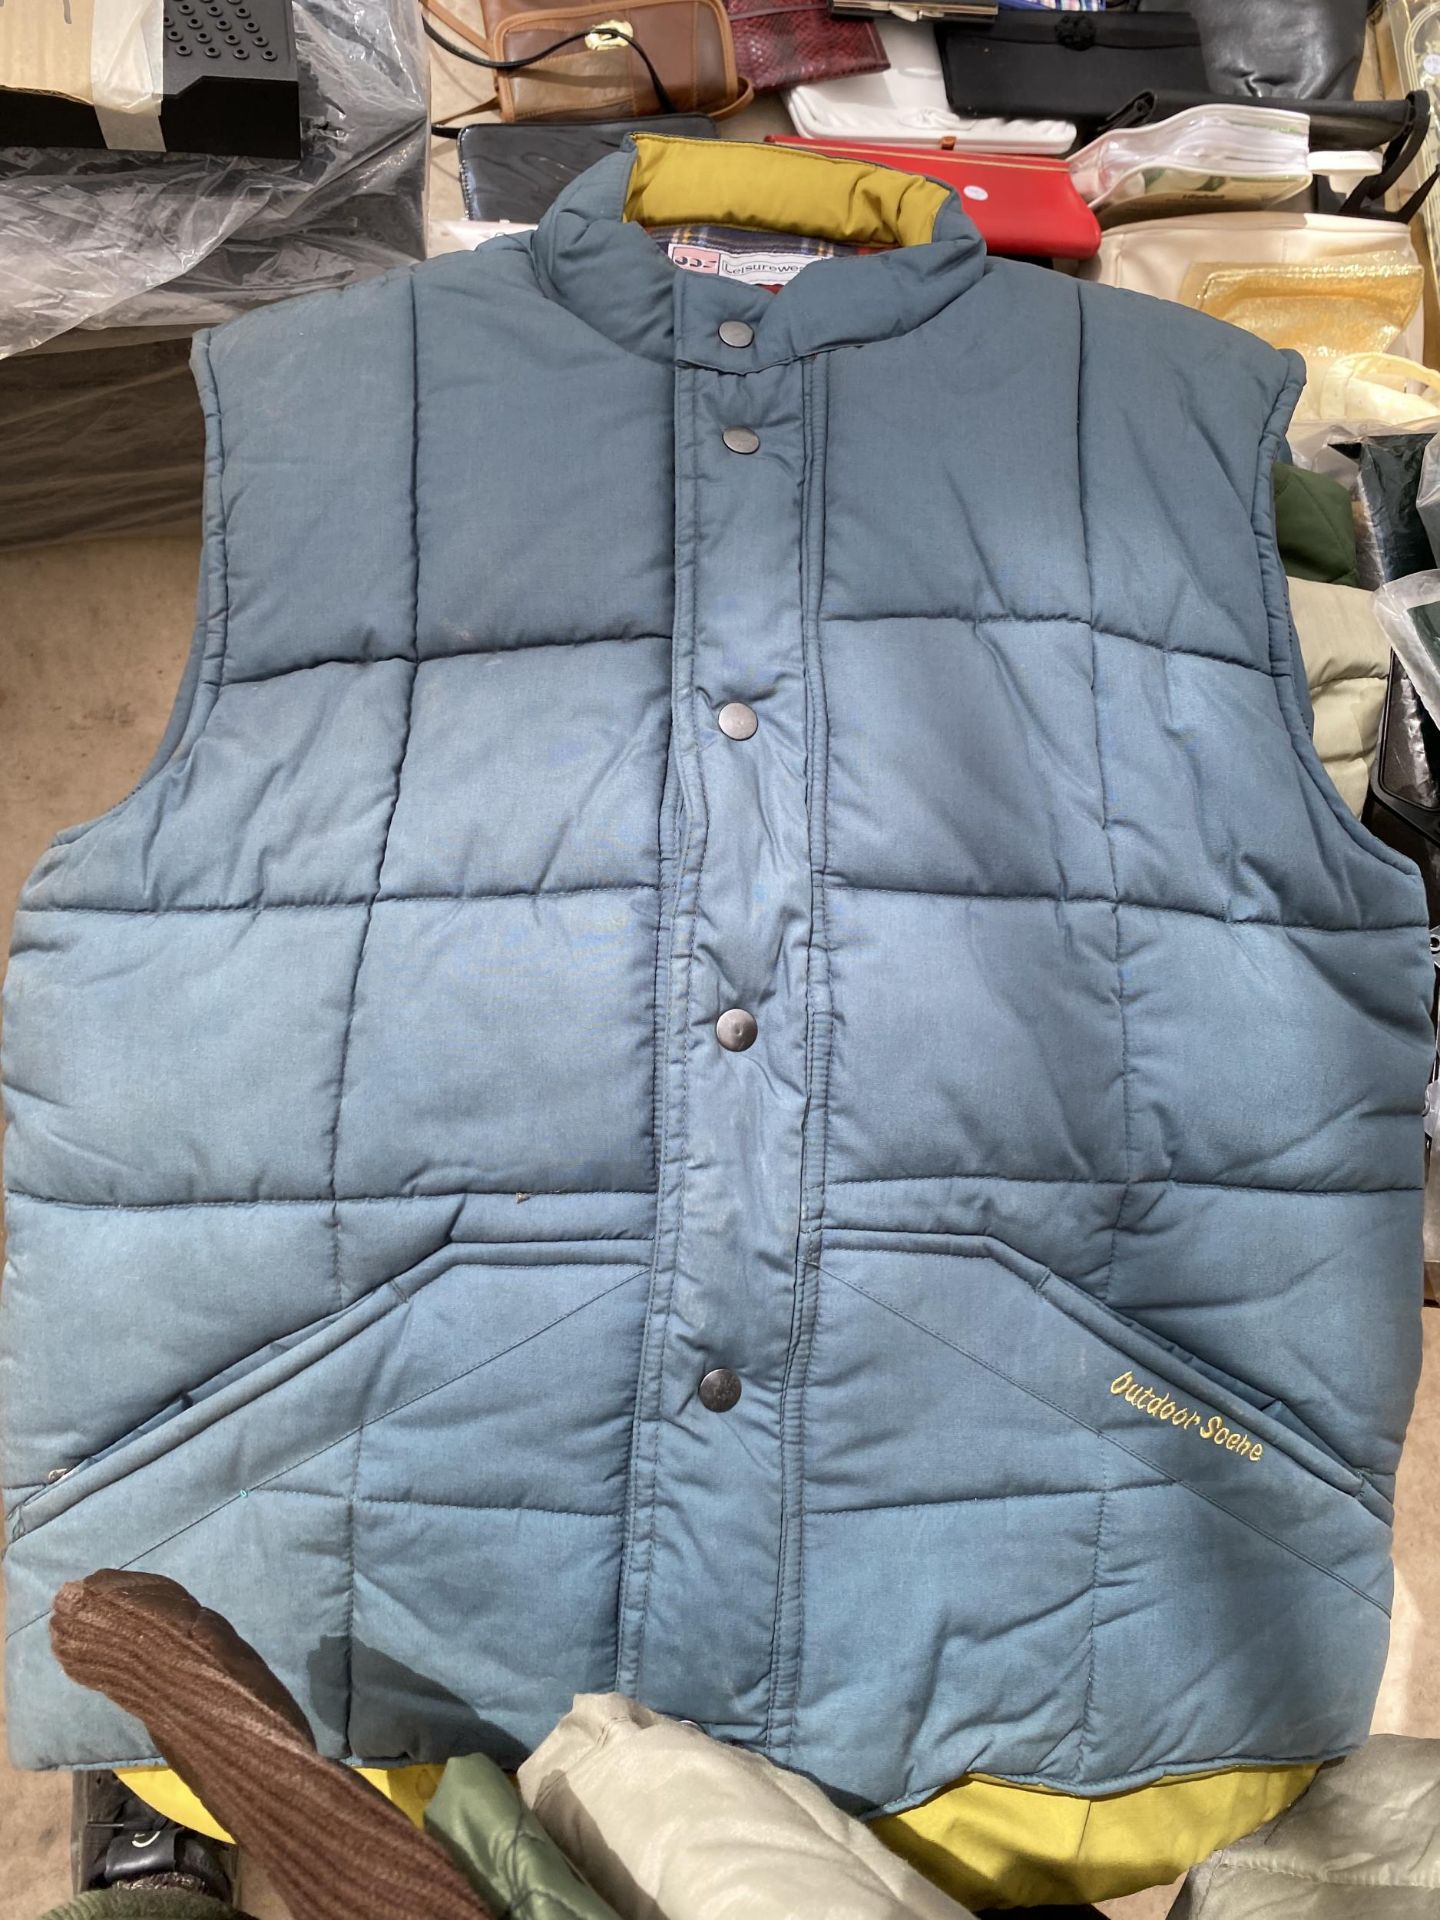 A BOX OF AS NEW GILET BODY WARMERS (FROM A TACKLE SHOP CLEARANCE) - Image 7 of 8